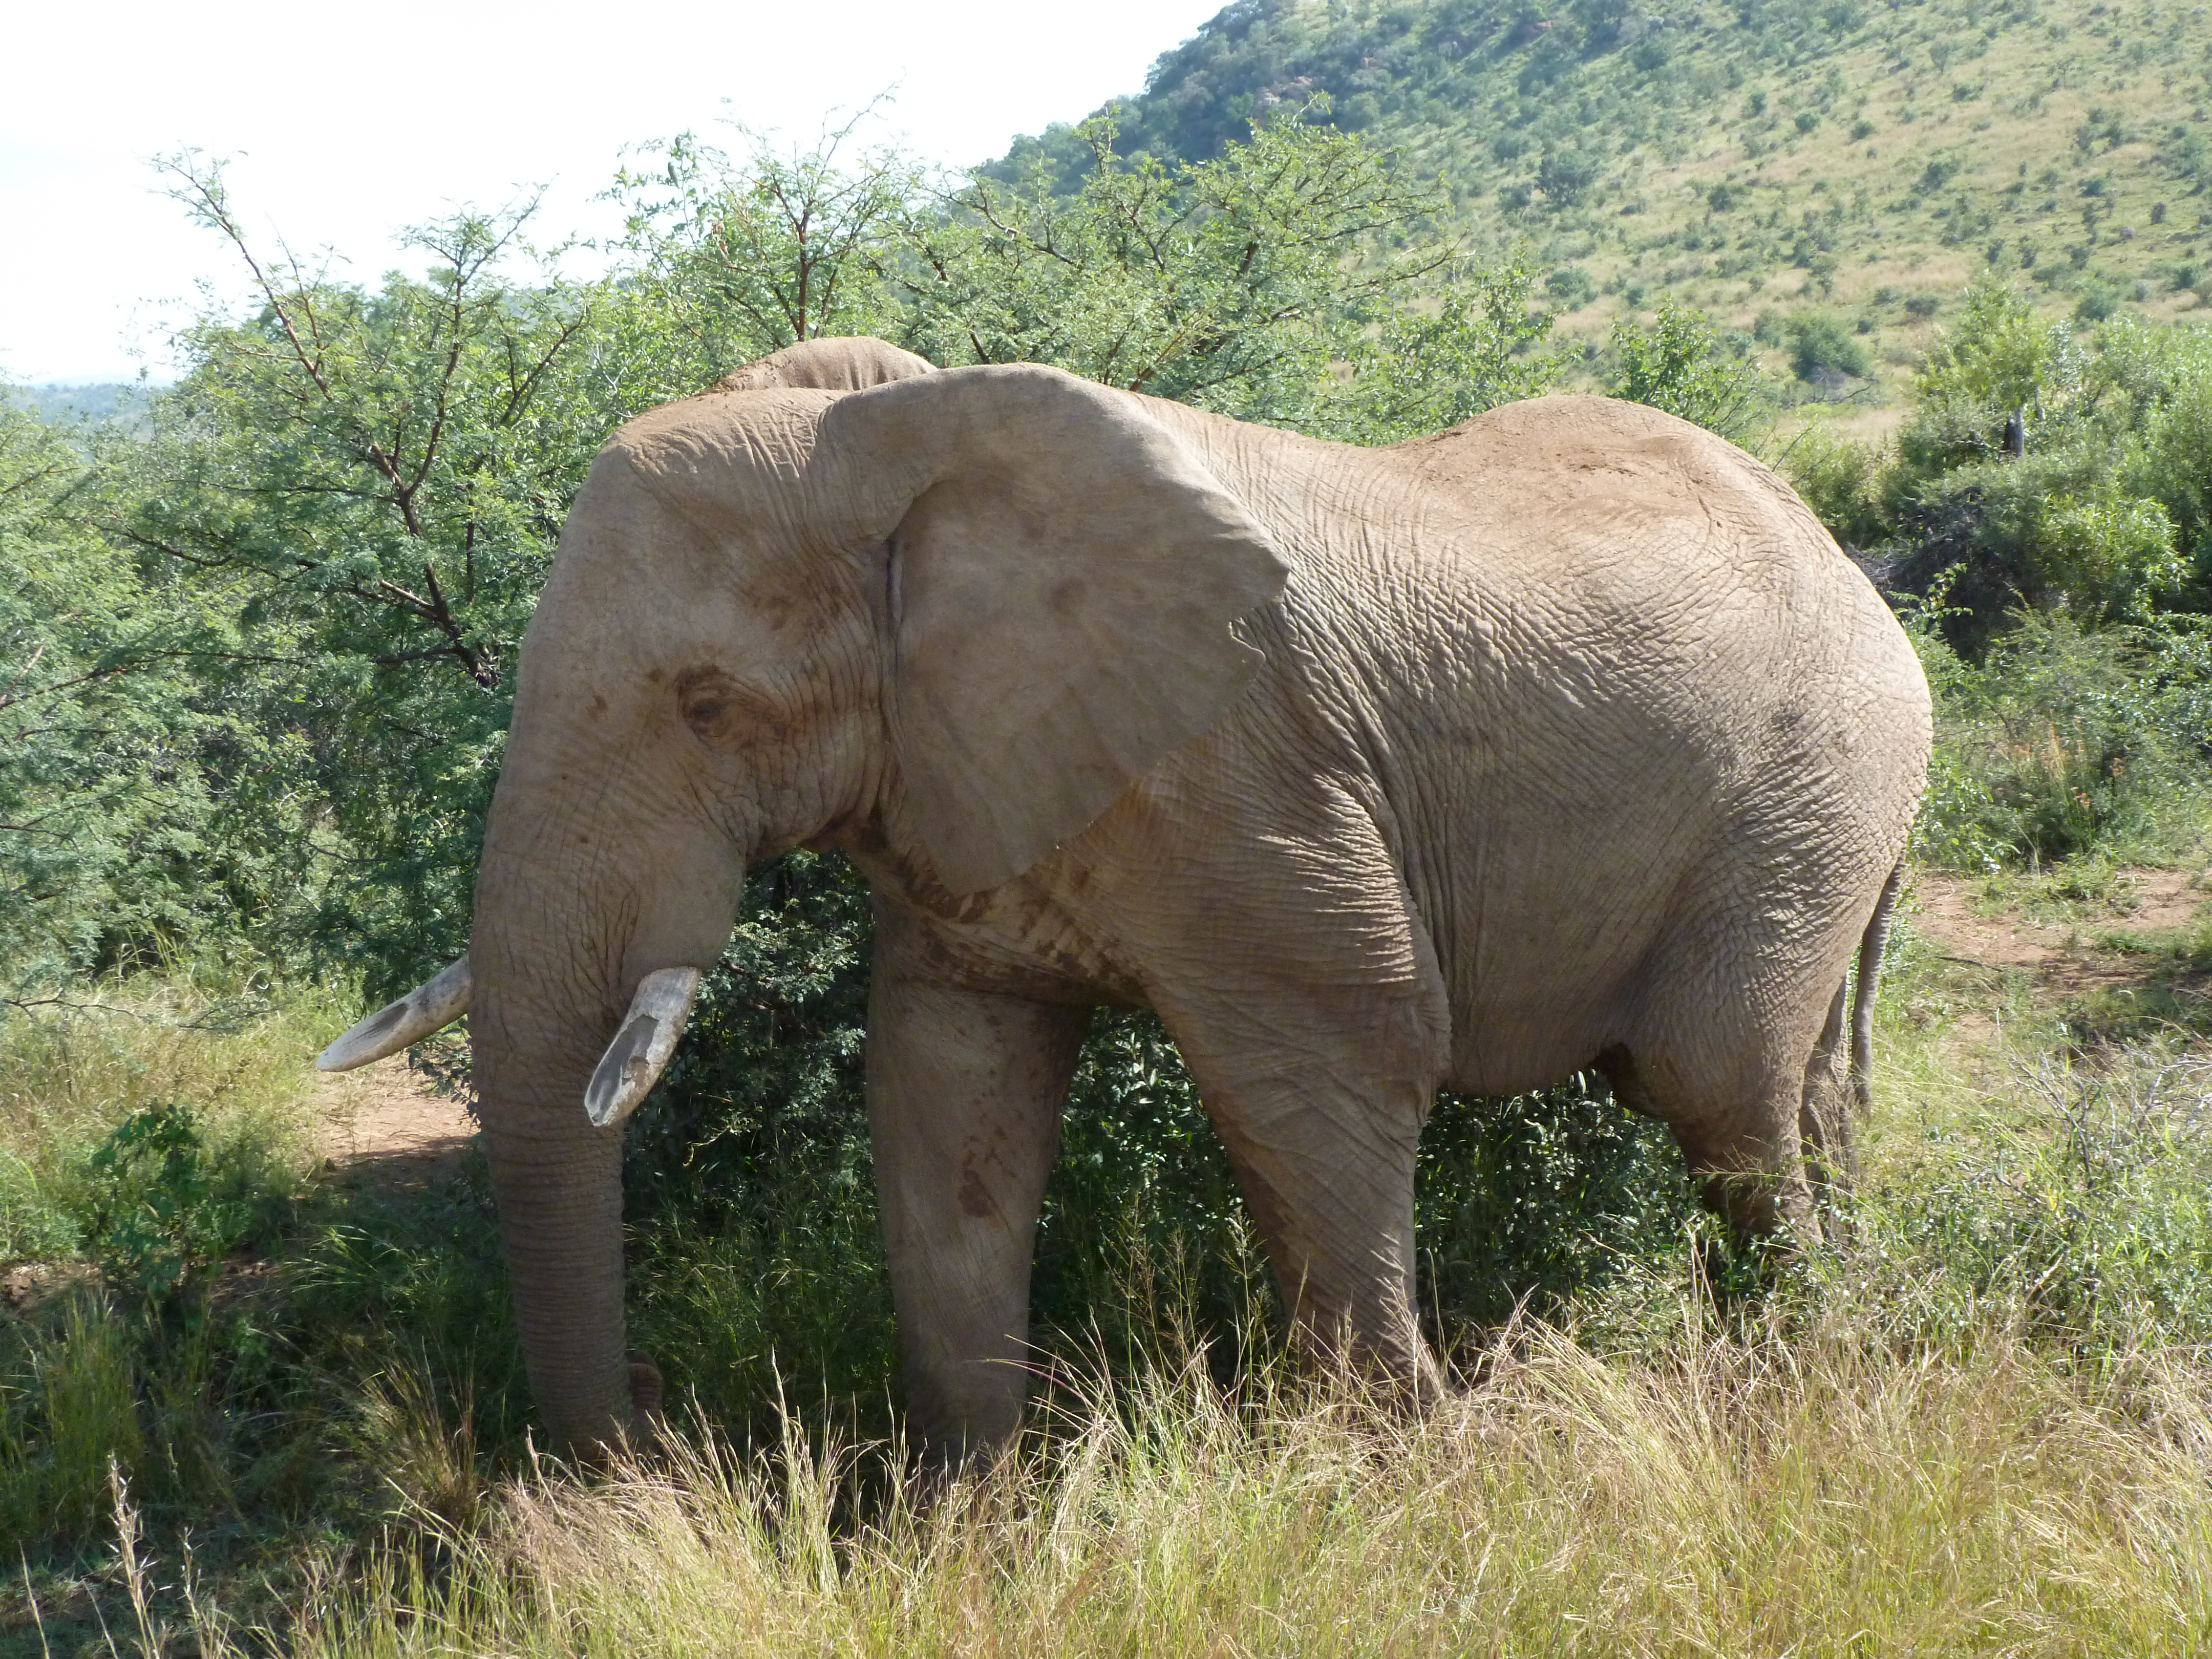 An elephant in the wild